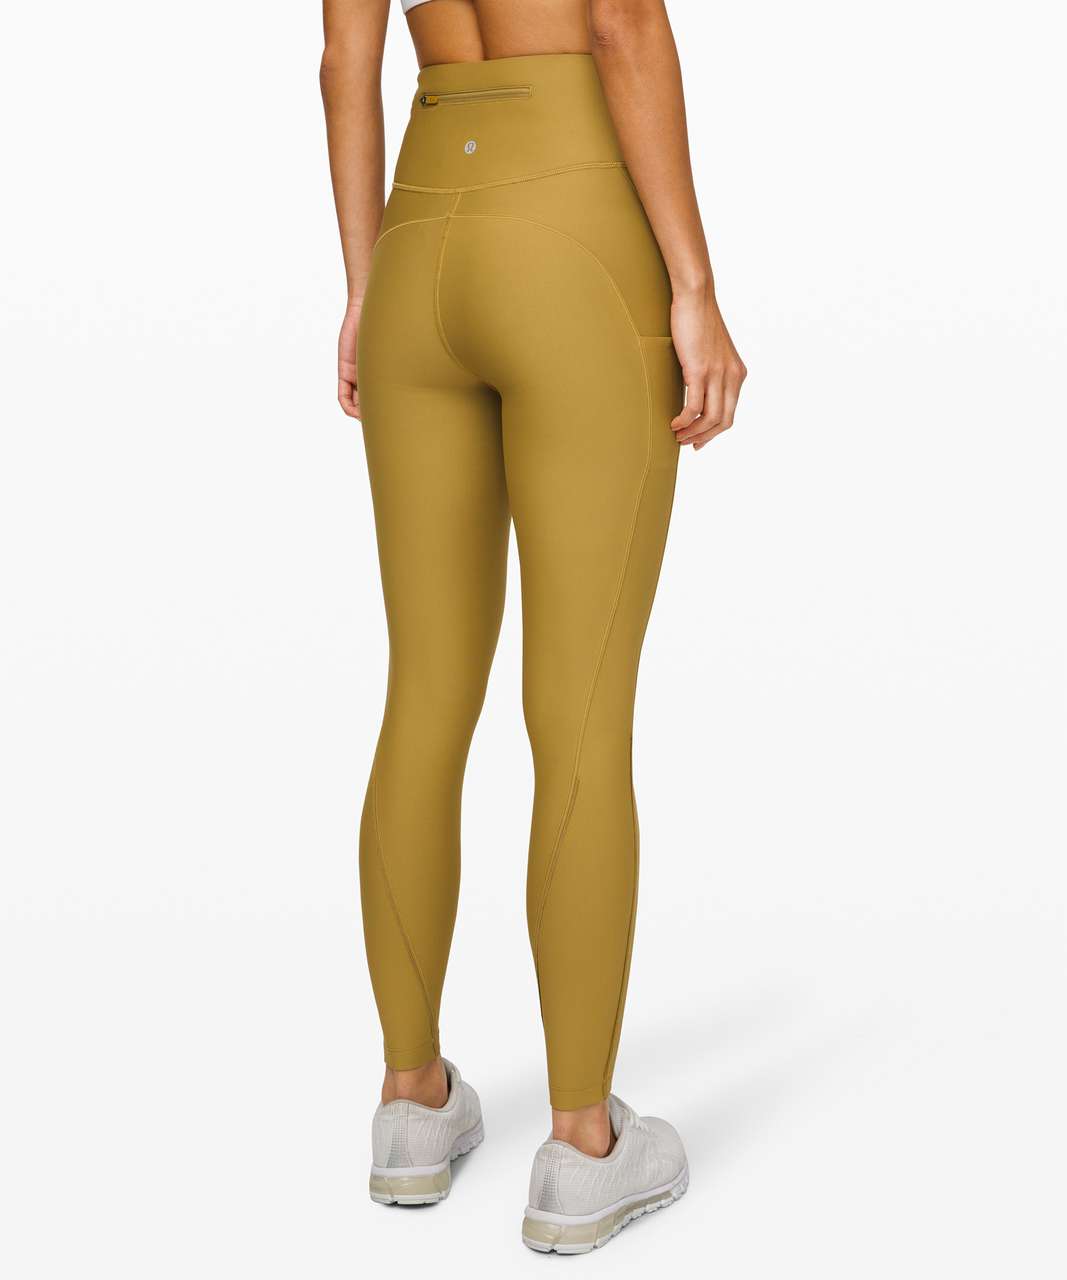 Break a Trail SHR Tight 28” size 6 - Review in the comments : r/lululemon